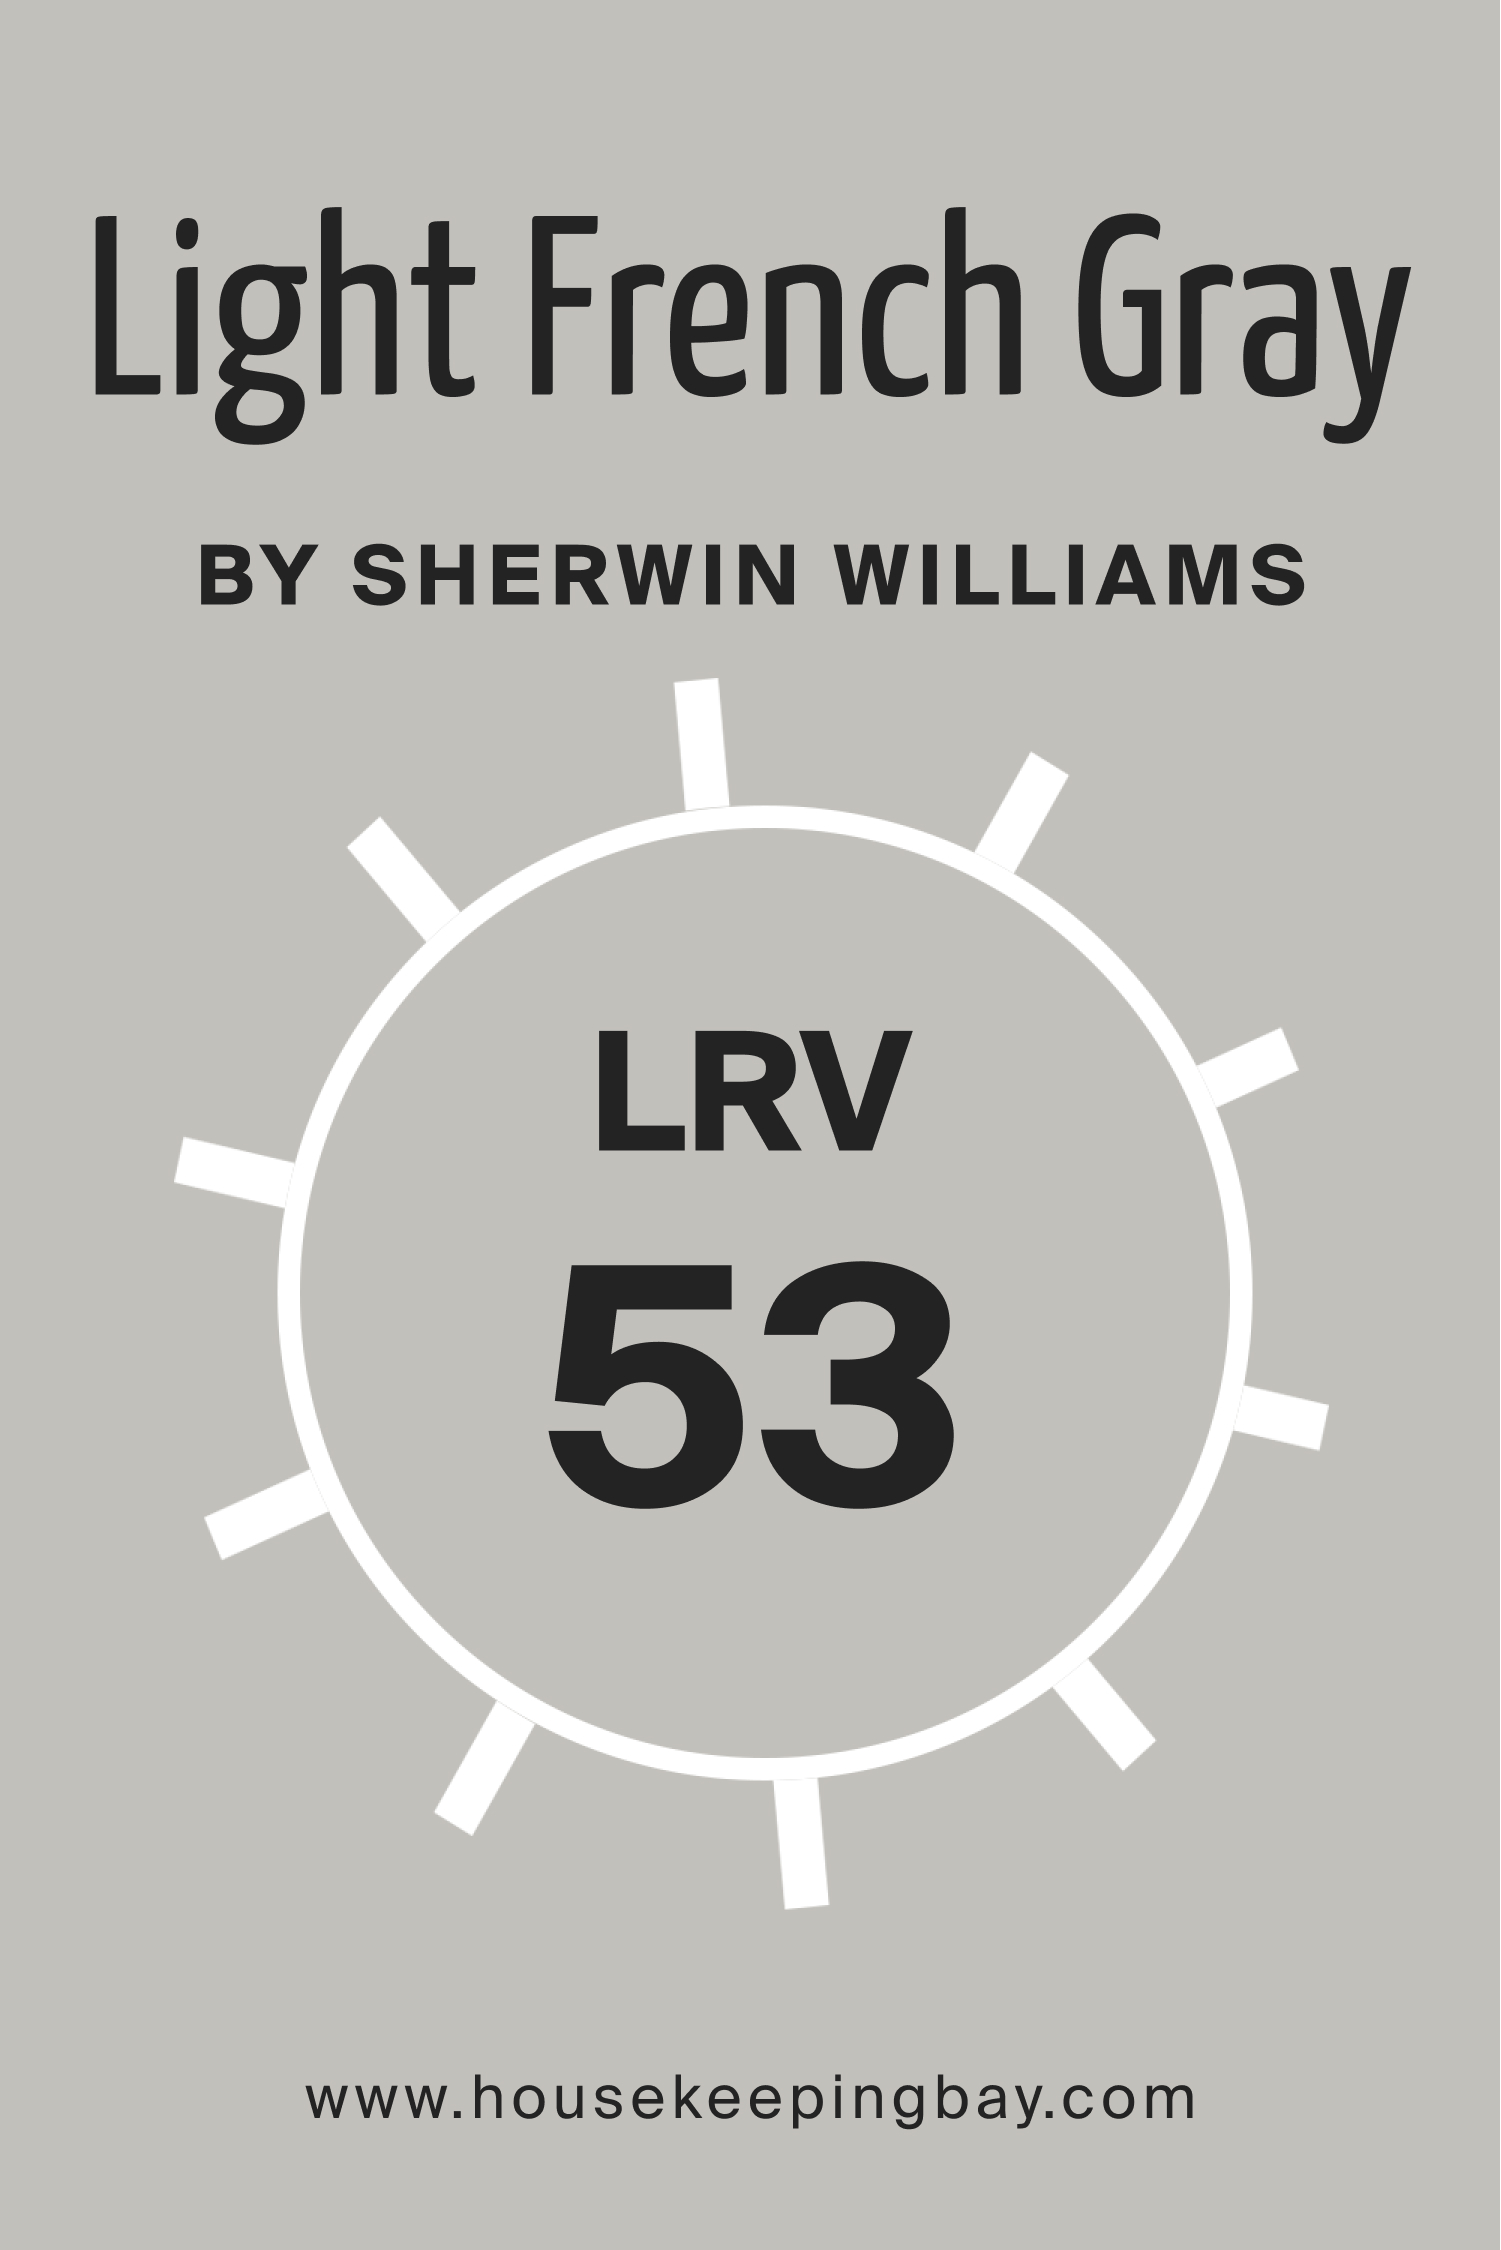 Light French Gray by Sherwin Williams. LRV – 53